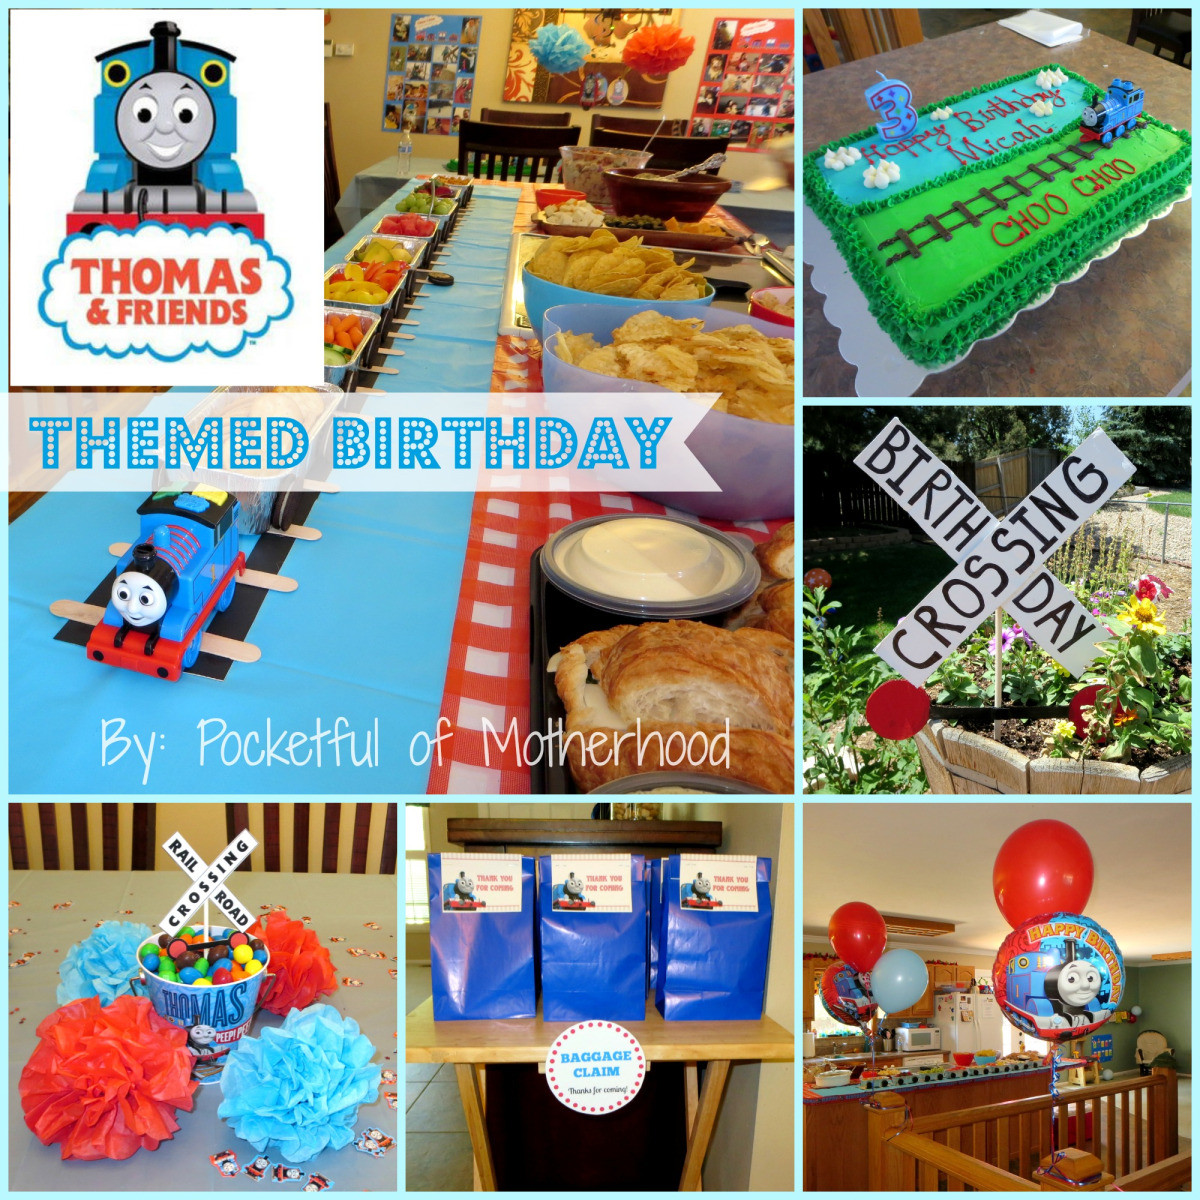 Friends Birthday Party Ideas
 Thomas and Friends Themed Birthday Party